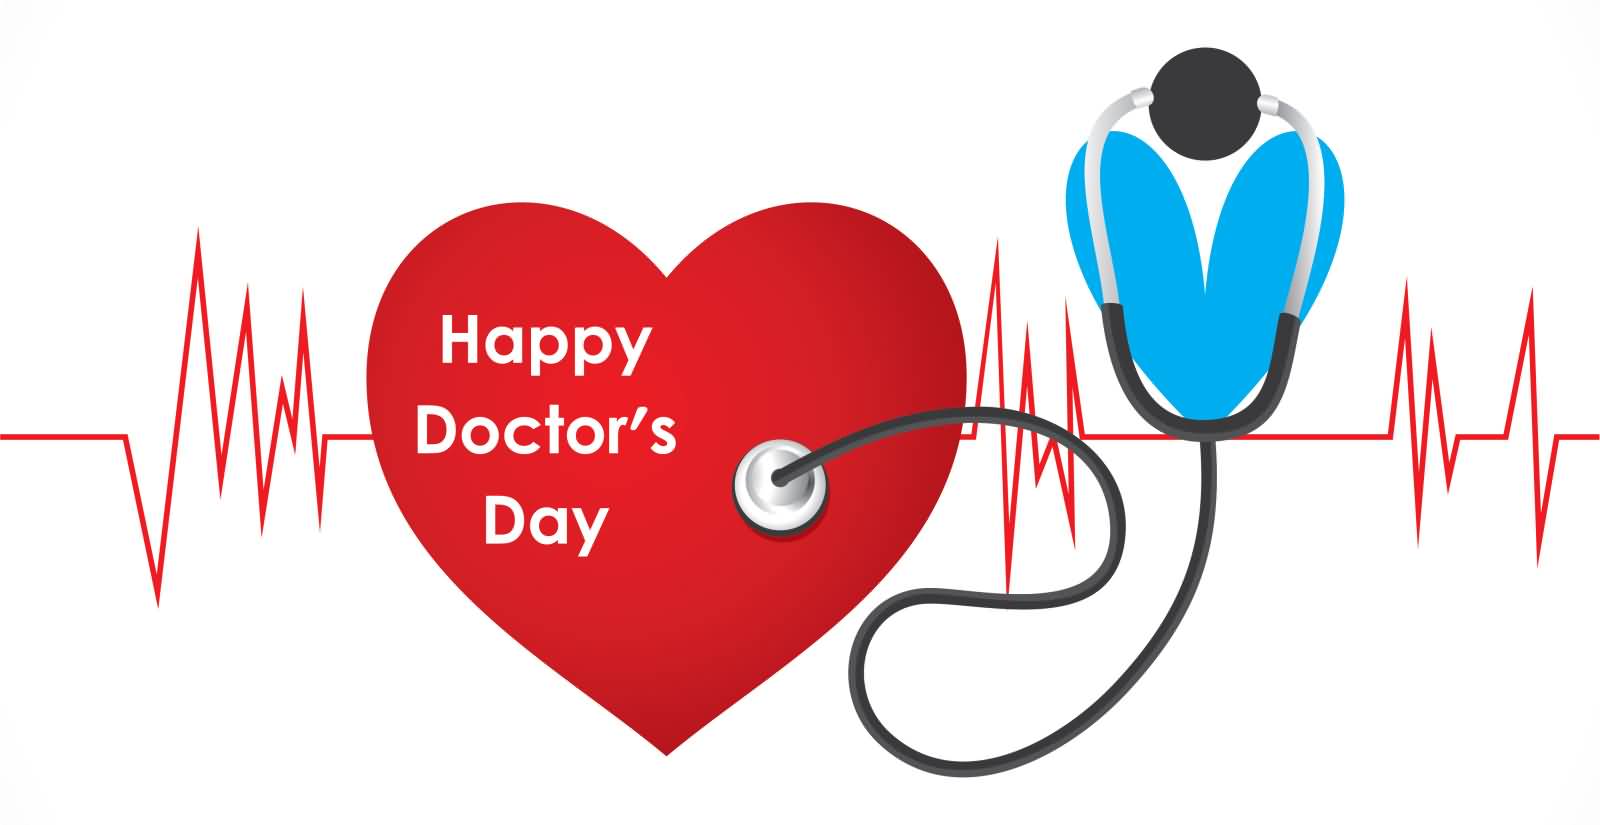 Happy Doctor's Day Heart